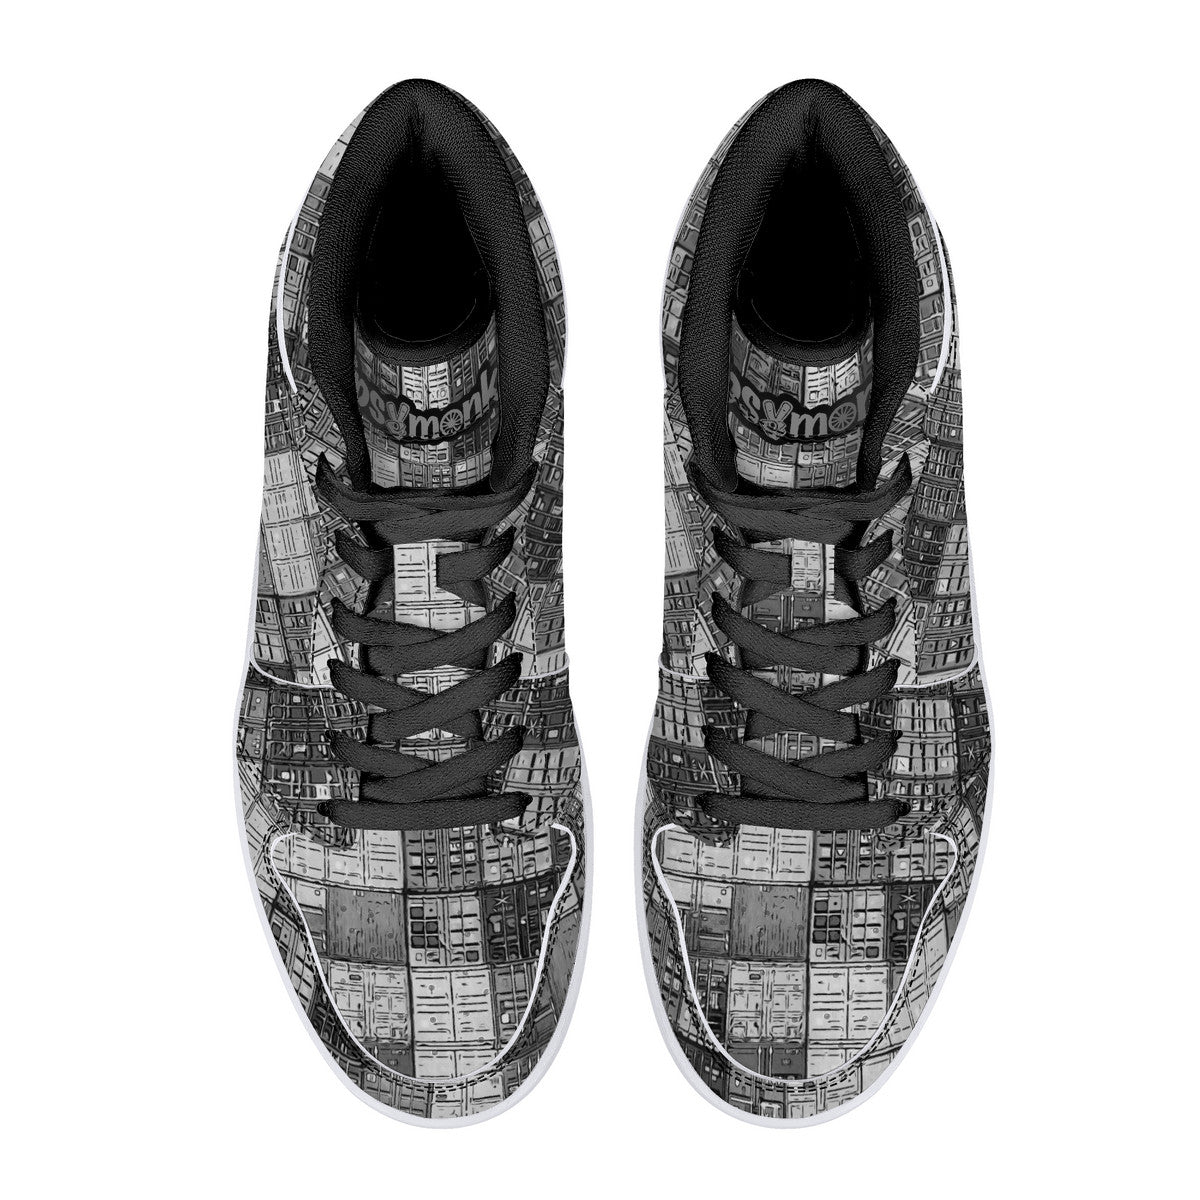 "Mono Shipping Containers" High-Top Synthetic Leather Sneakers